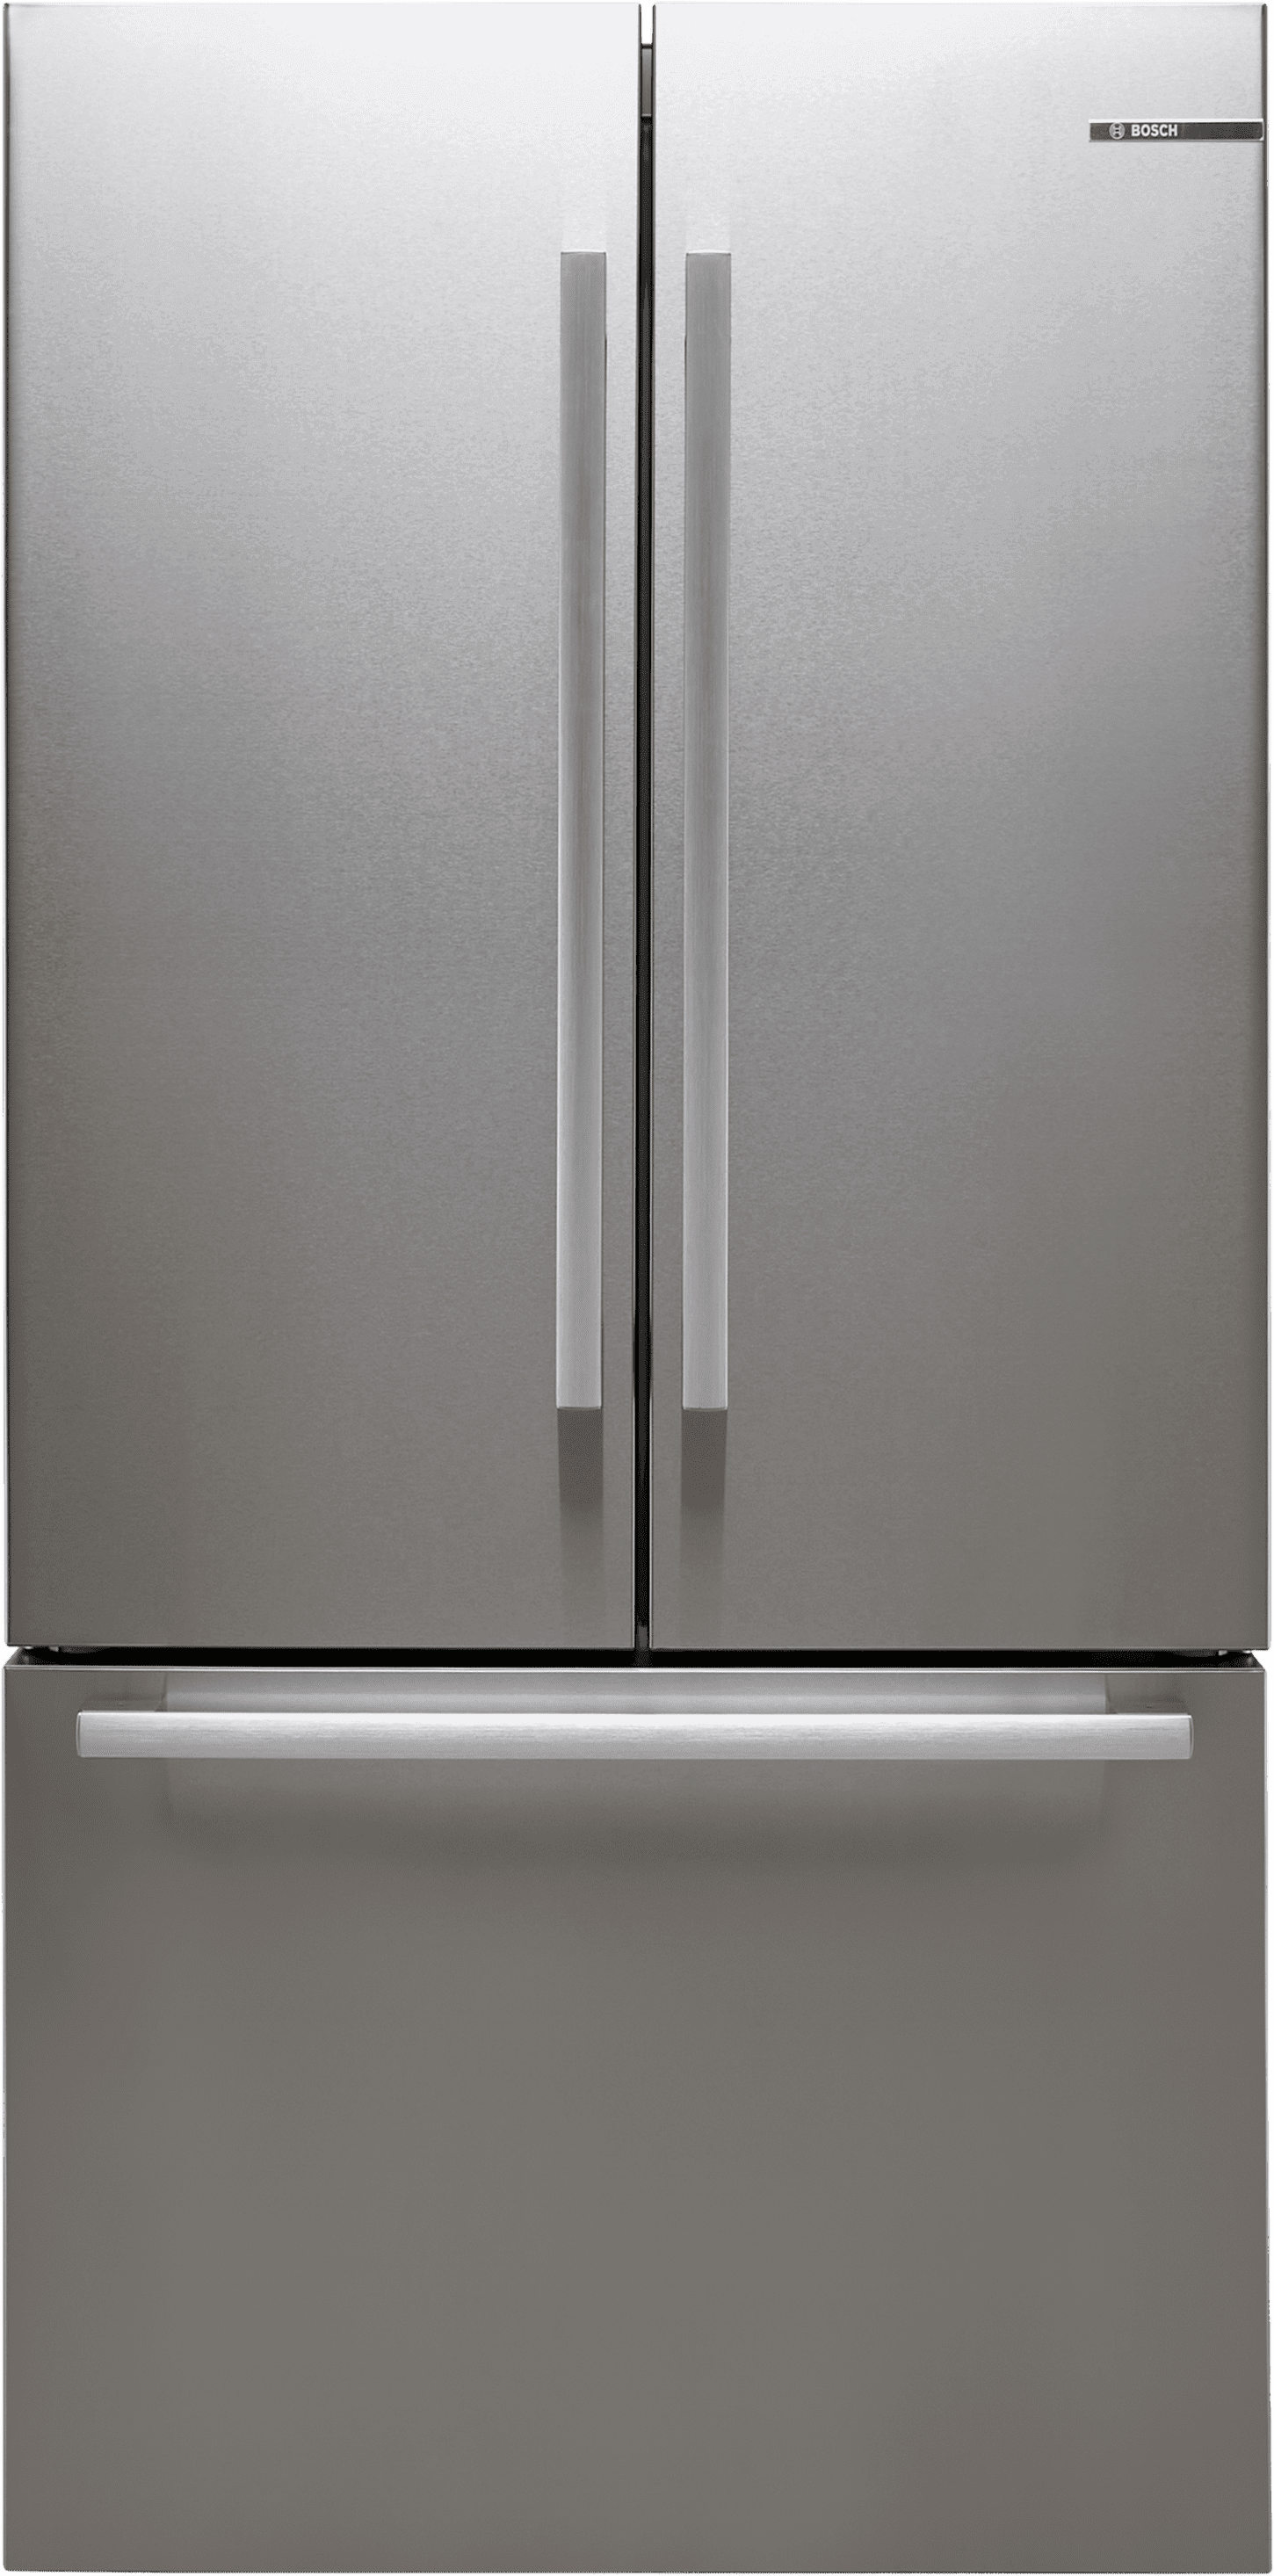 Bosch Series 8 KFF96PIEP Wifi Connected Frost Free American Fridge Freezer - Stainless Steel Effect - E Rated, Stainless Steel